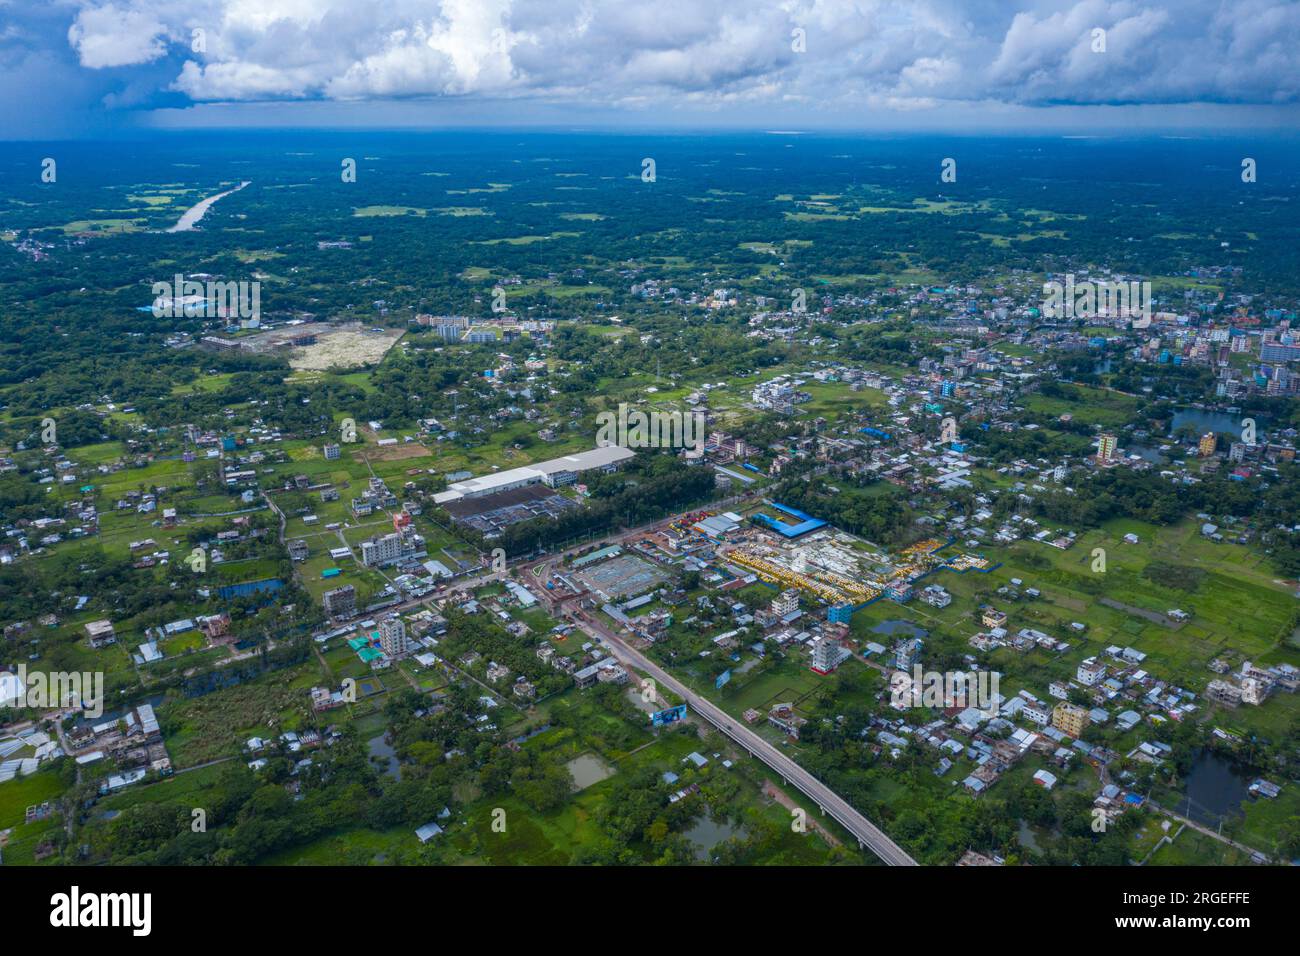 Aerial view of a part of the Barisal city, Bangladesh Stock Photo